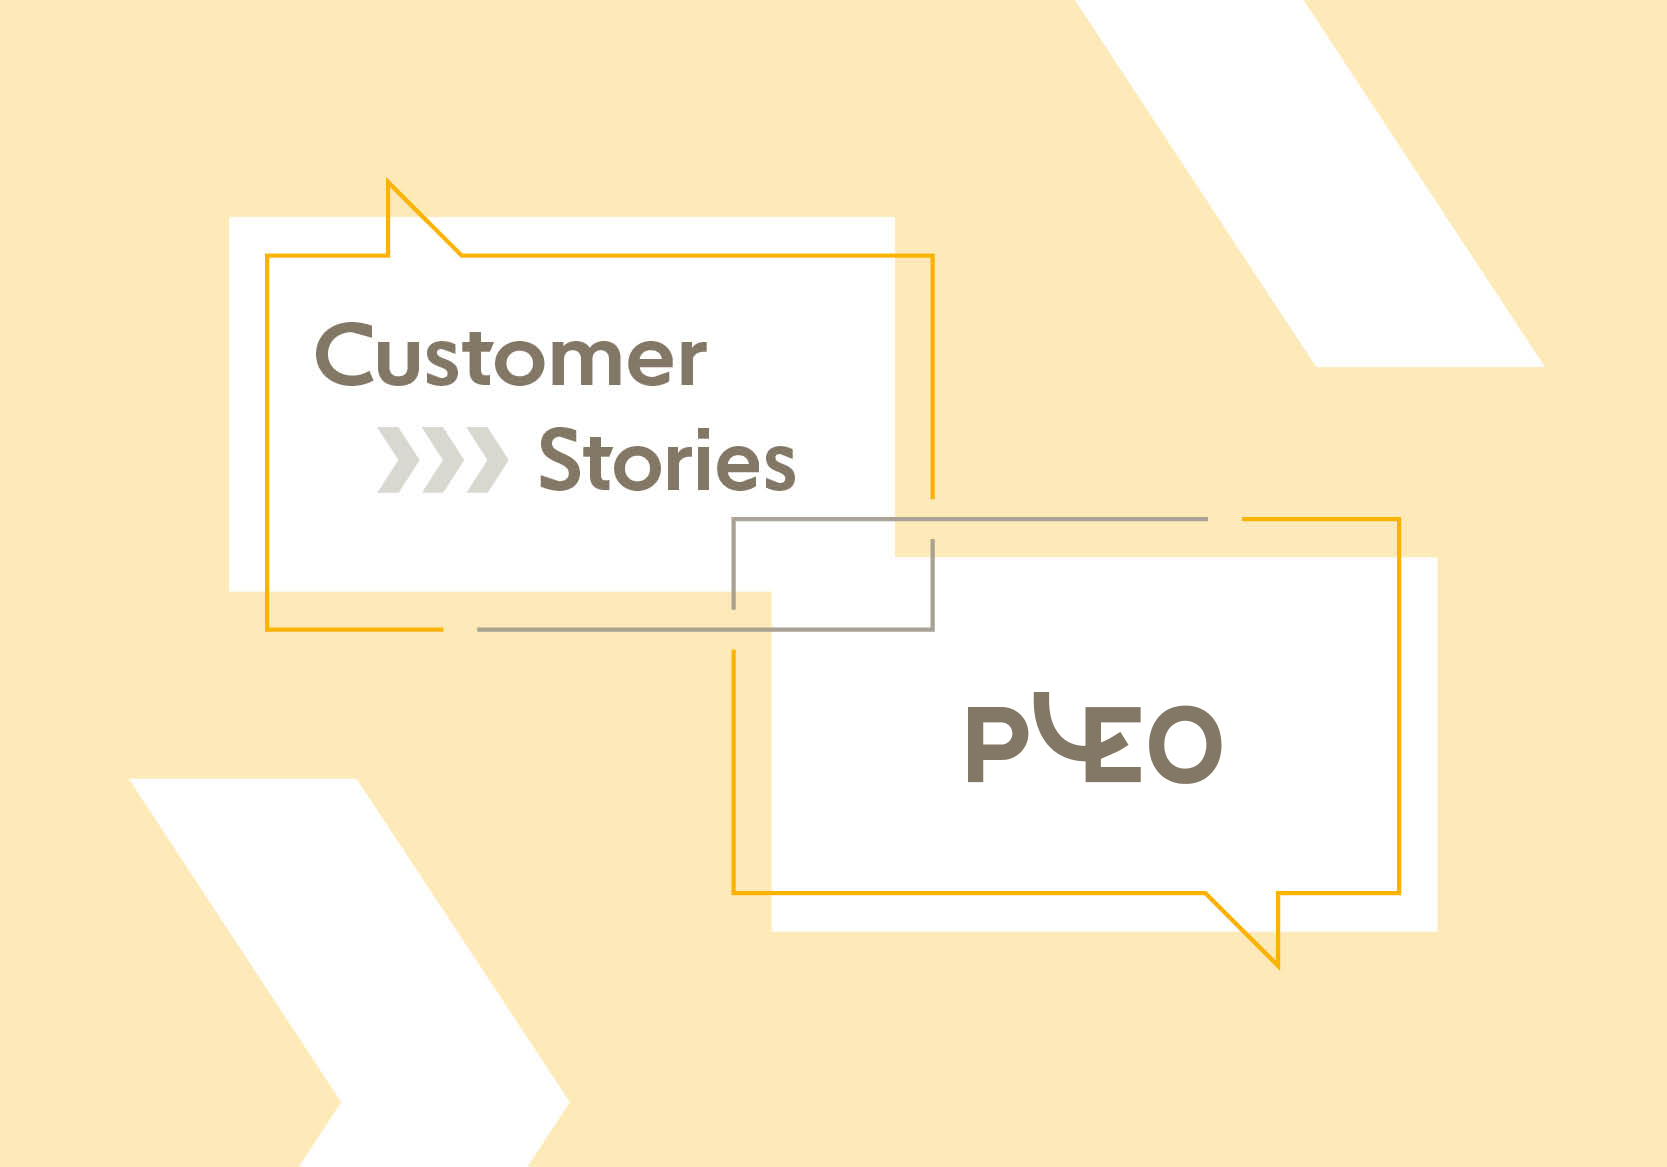 Learn how Pleo is harnessing  the power of open banking  to redefine business spending  with Yapily